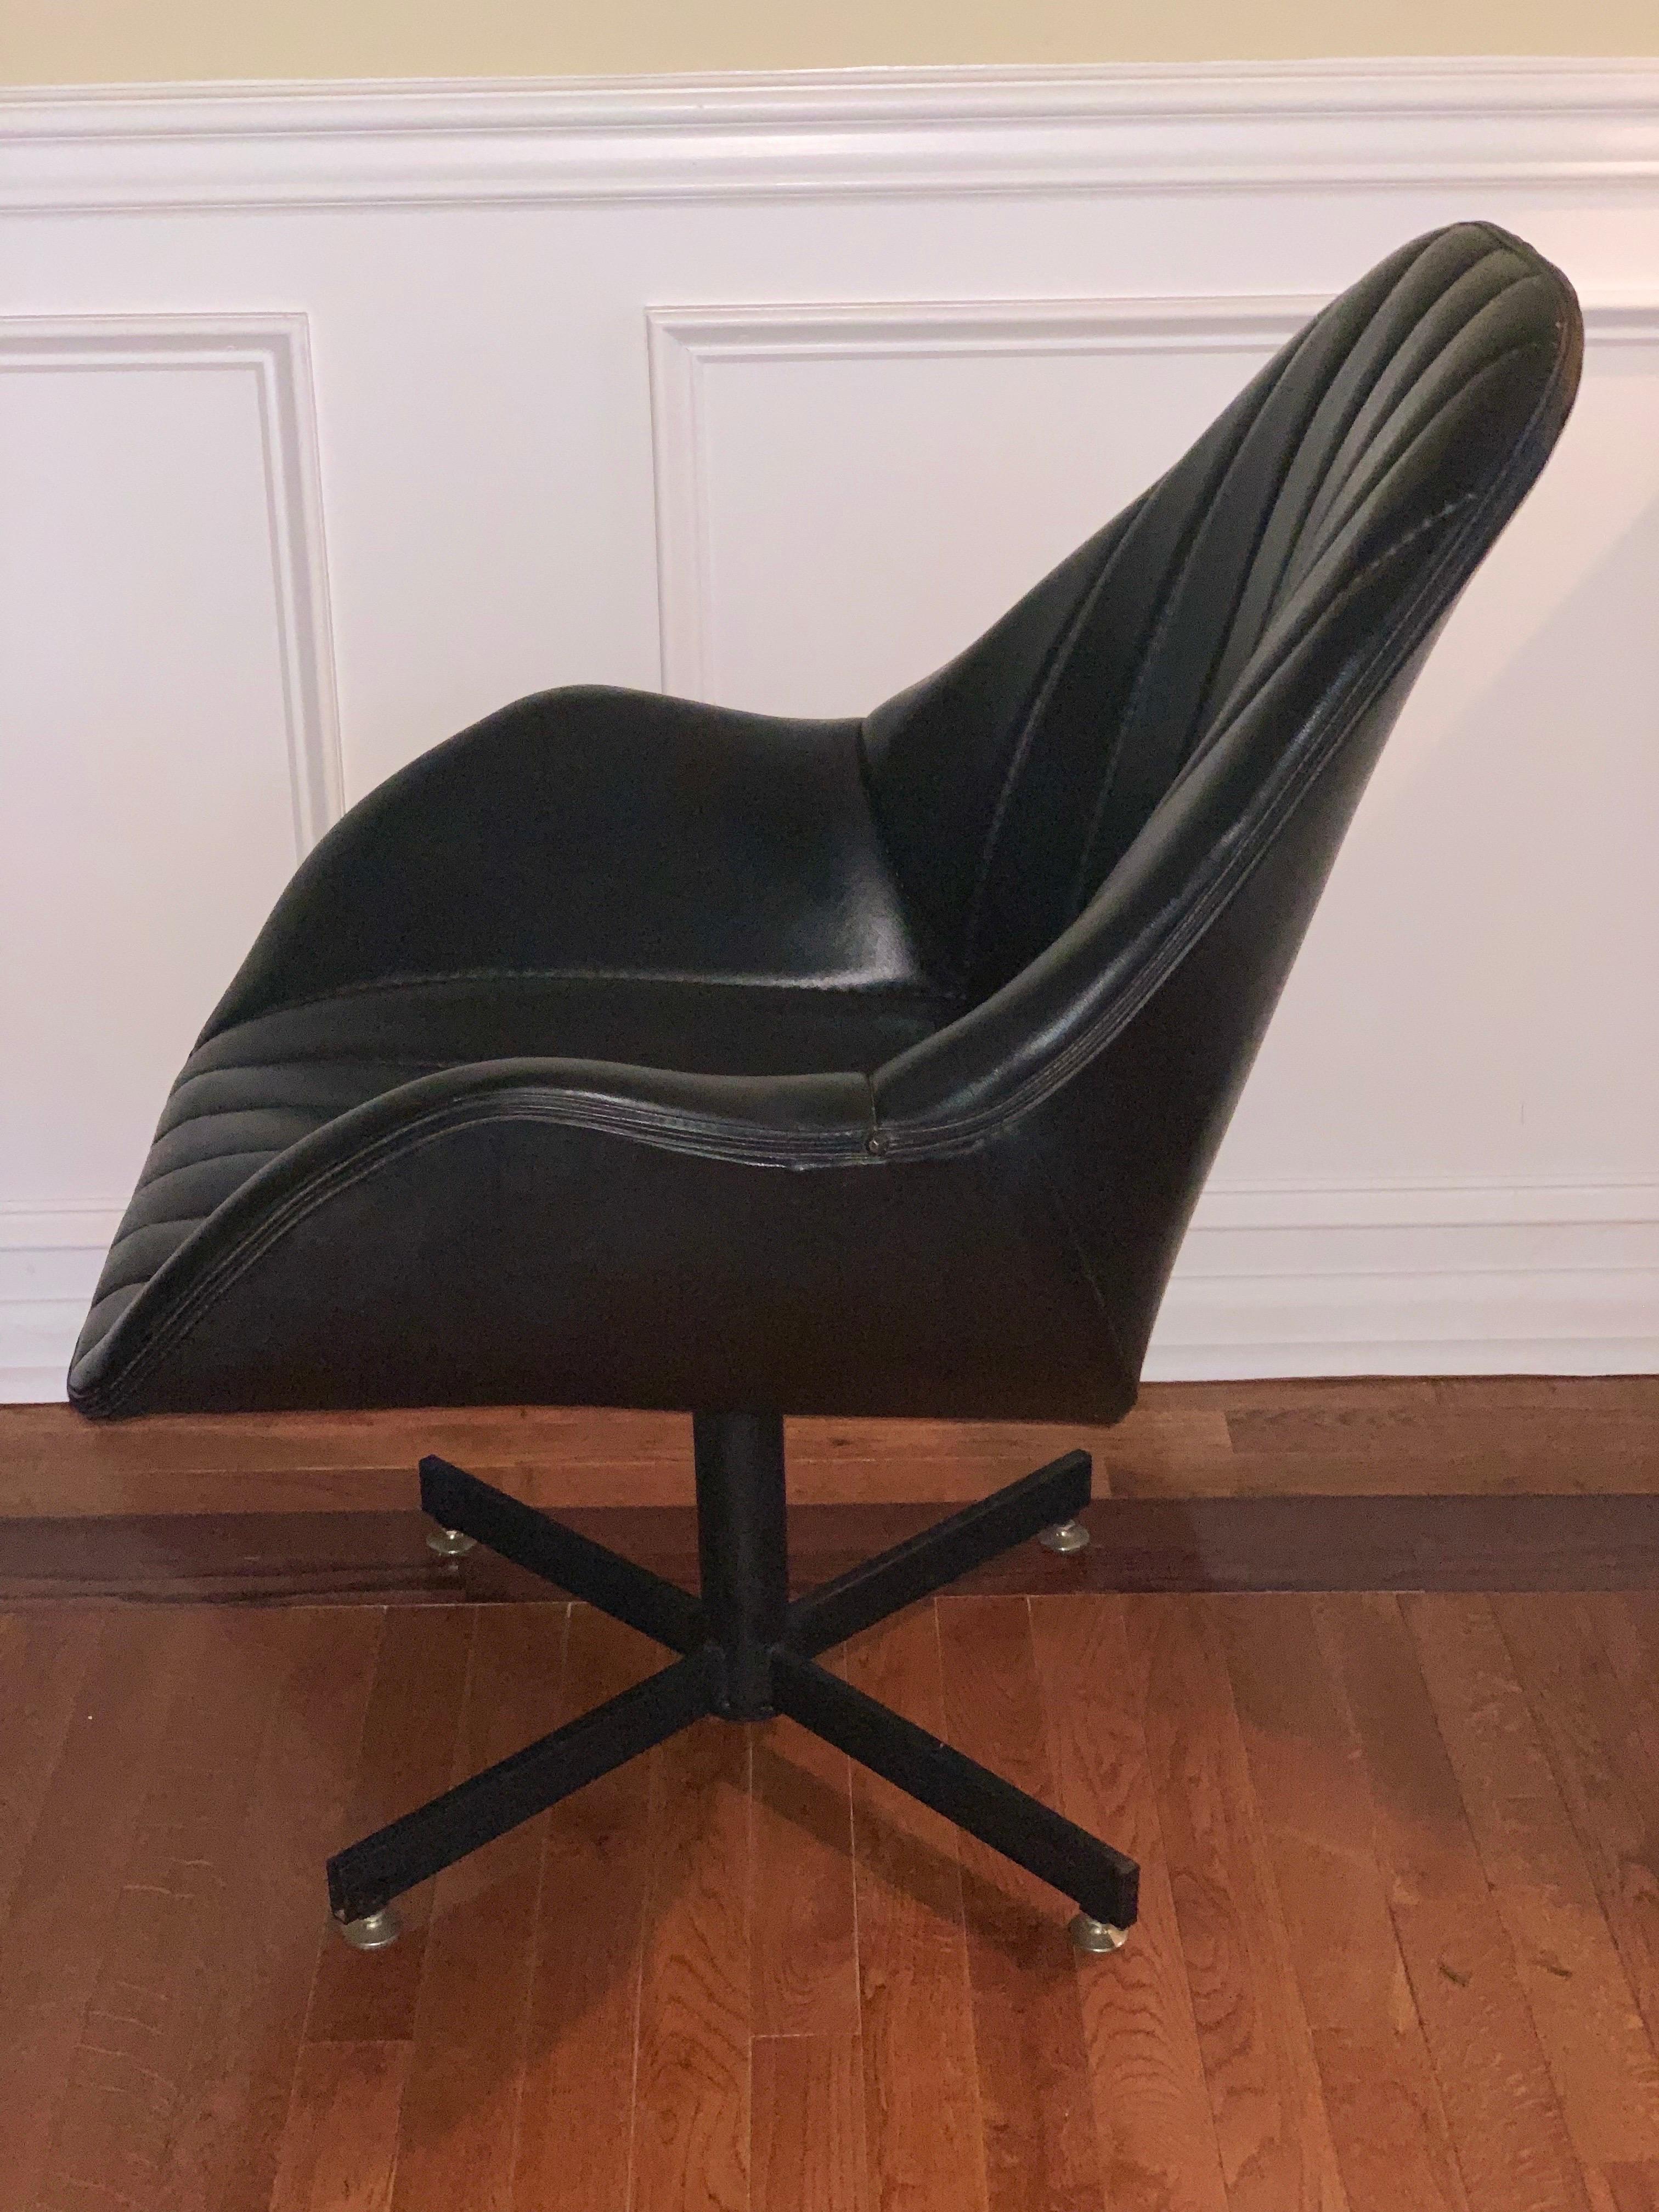 Handsome vintage 1980's Naugahyde swivel bucket lounge chair on a black metal base. Well made and comfortable with very little use noted. Chair swivels smoothly and easily. The seat and back are channel-tufted. 

This chair has an understated yet